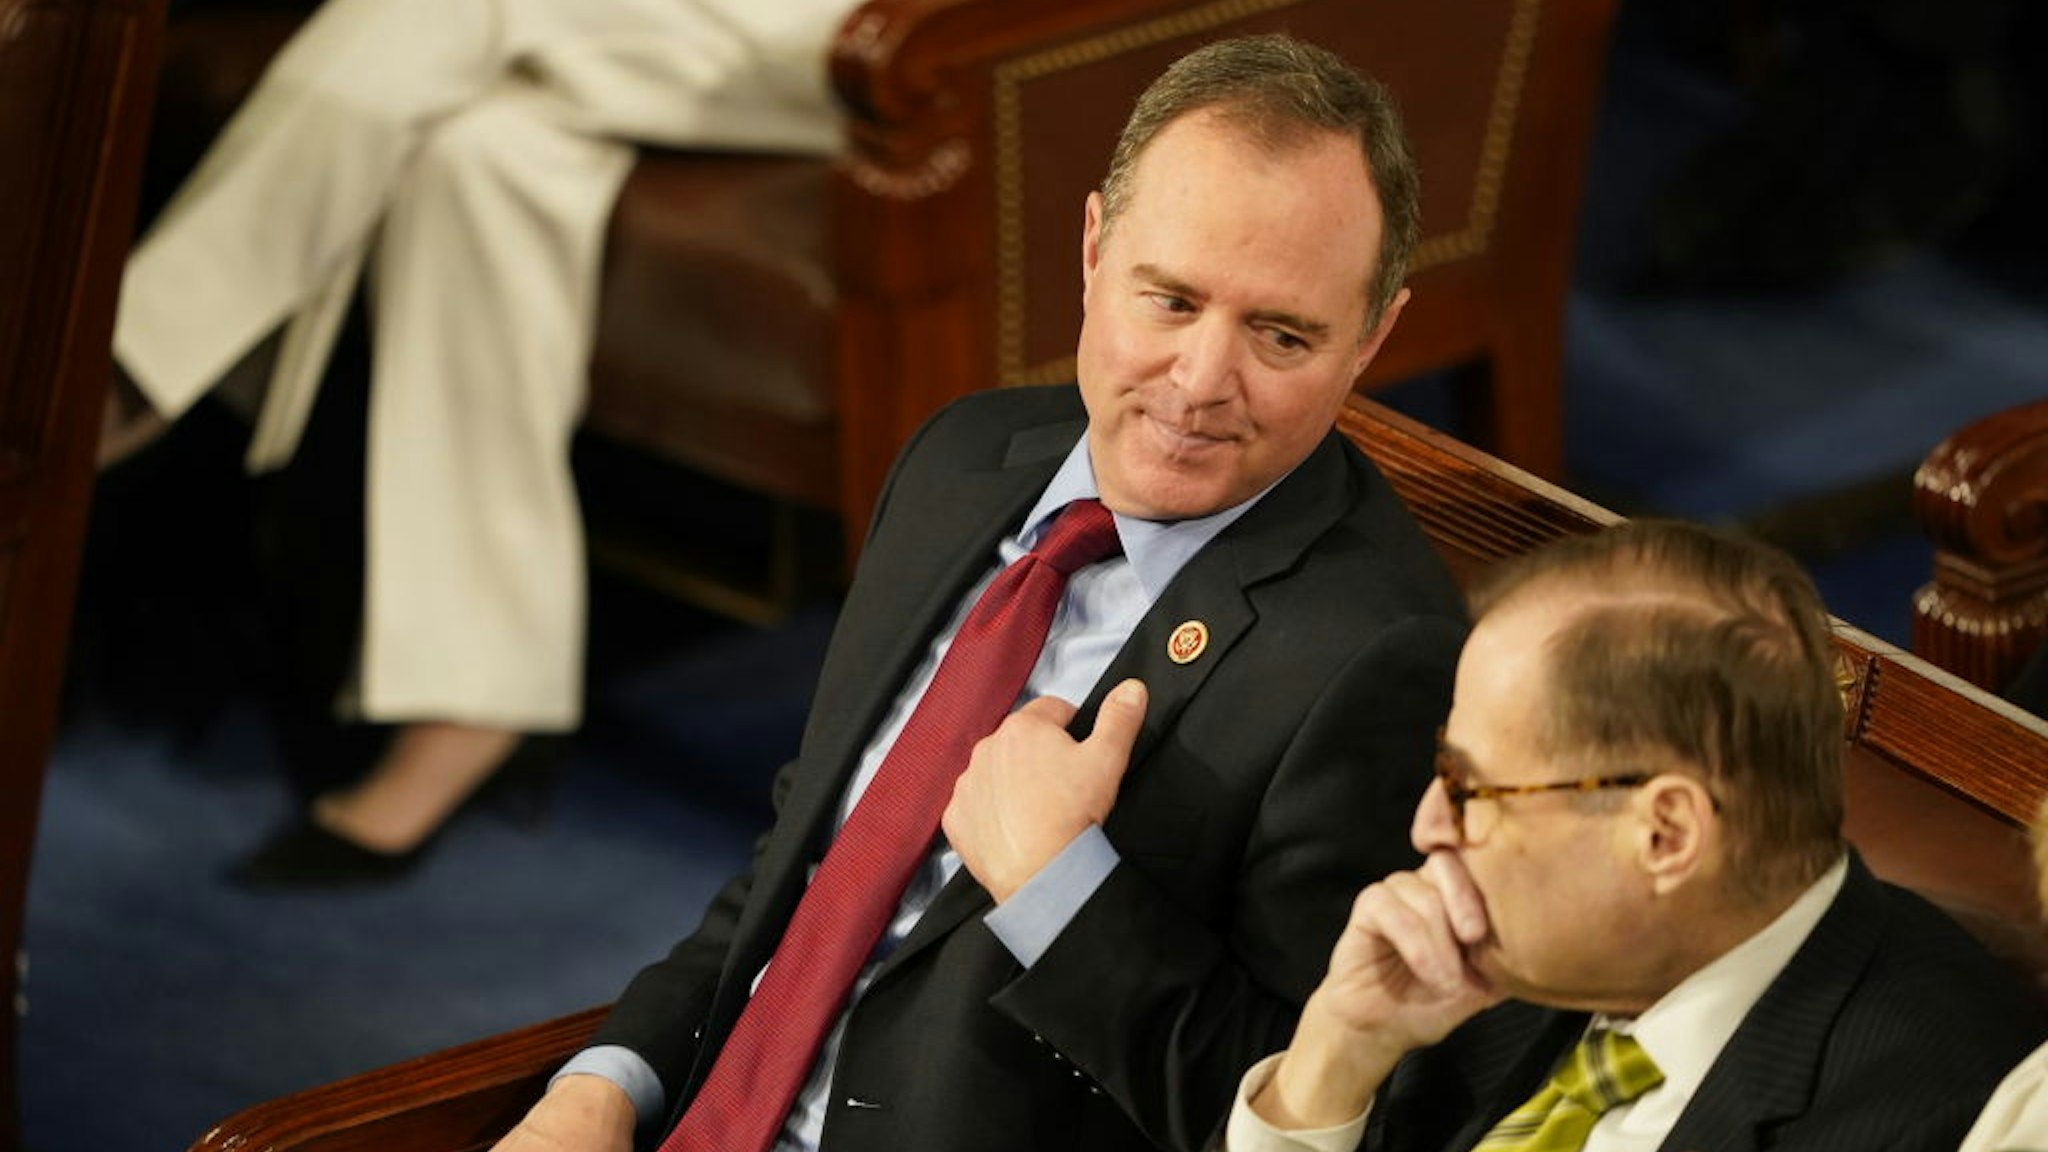 Rep. Adam Schiff looks at Rep. Jerrold Nadler during the State of the Union address before members of Congress in the House chamber of the U.S. Capitol February 4, 2020 in Washington, DC.